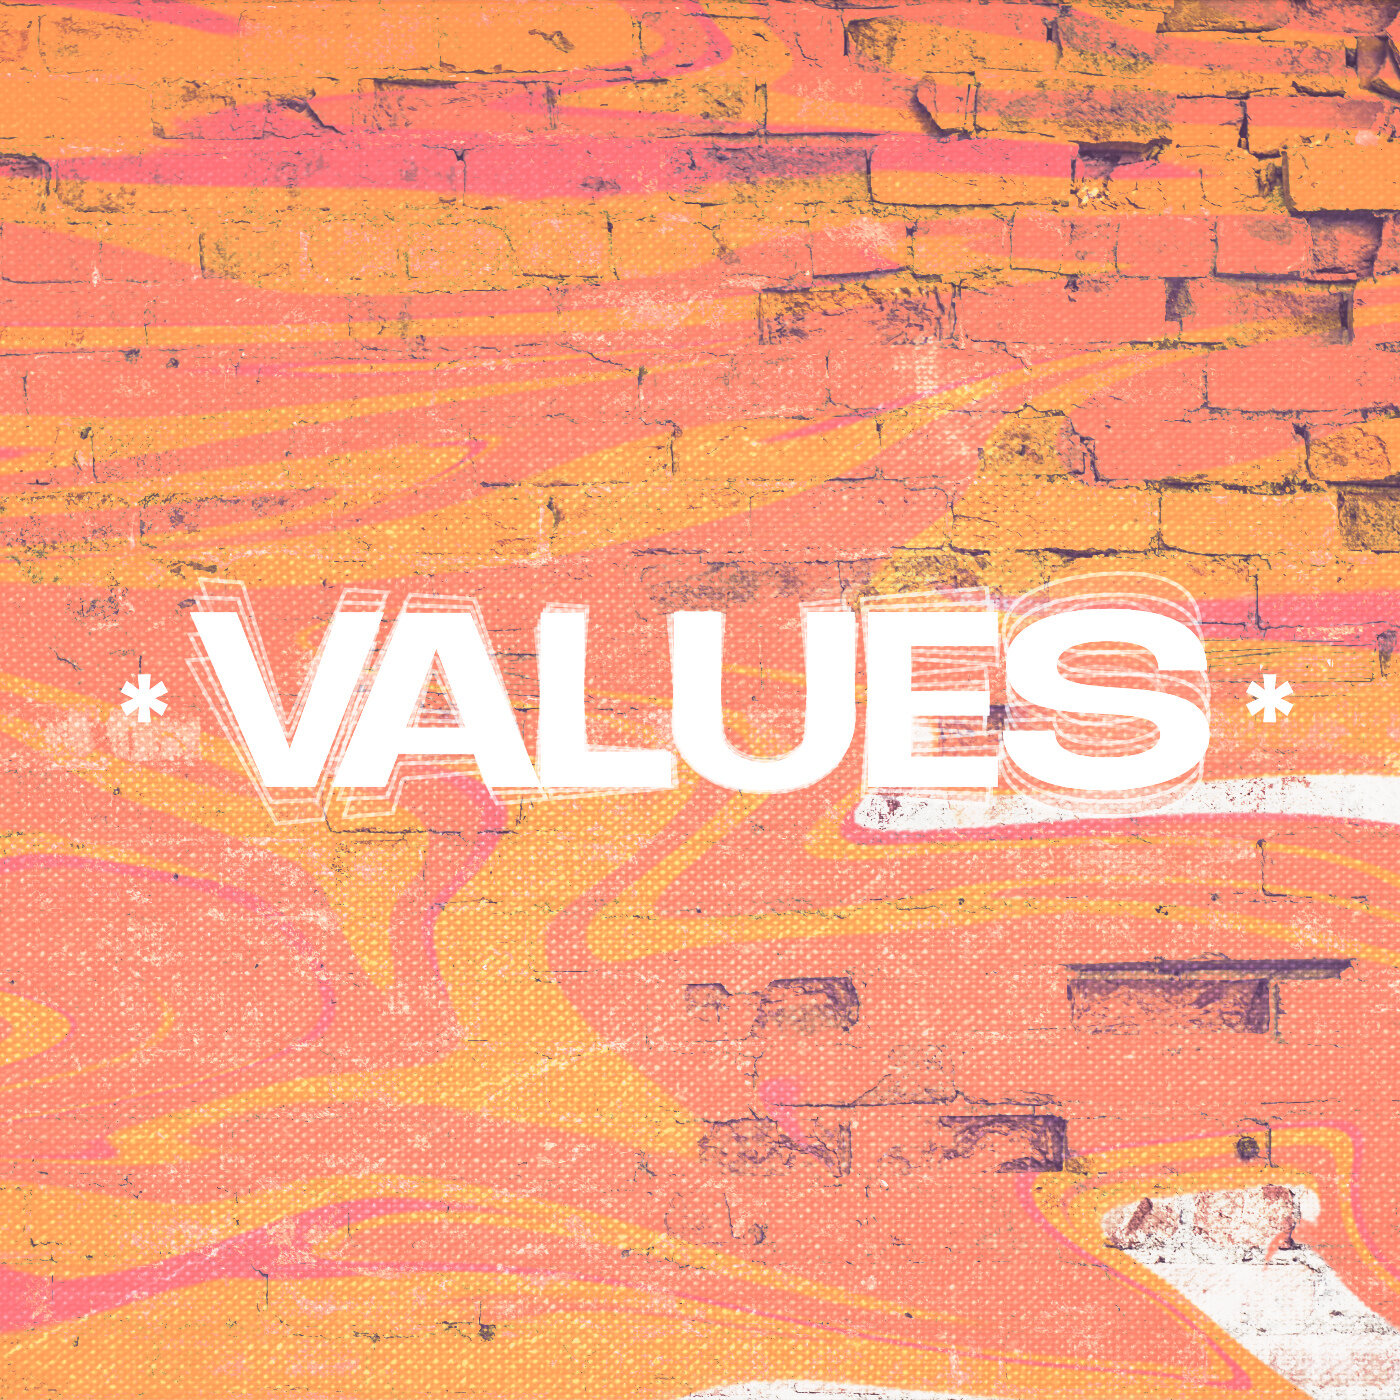 Come and join us as we gather this Sunday at 10am both in-person and online! We've got Pastor Mark kicking off a new series on 'Values' as we come together to worship this week. 

Our children &amp; young people will be moving up to their new groups 